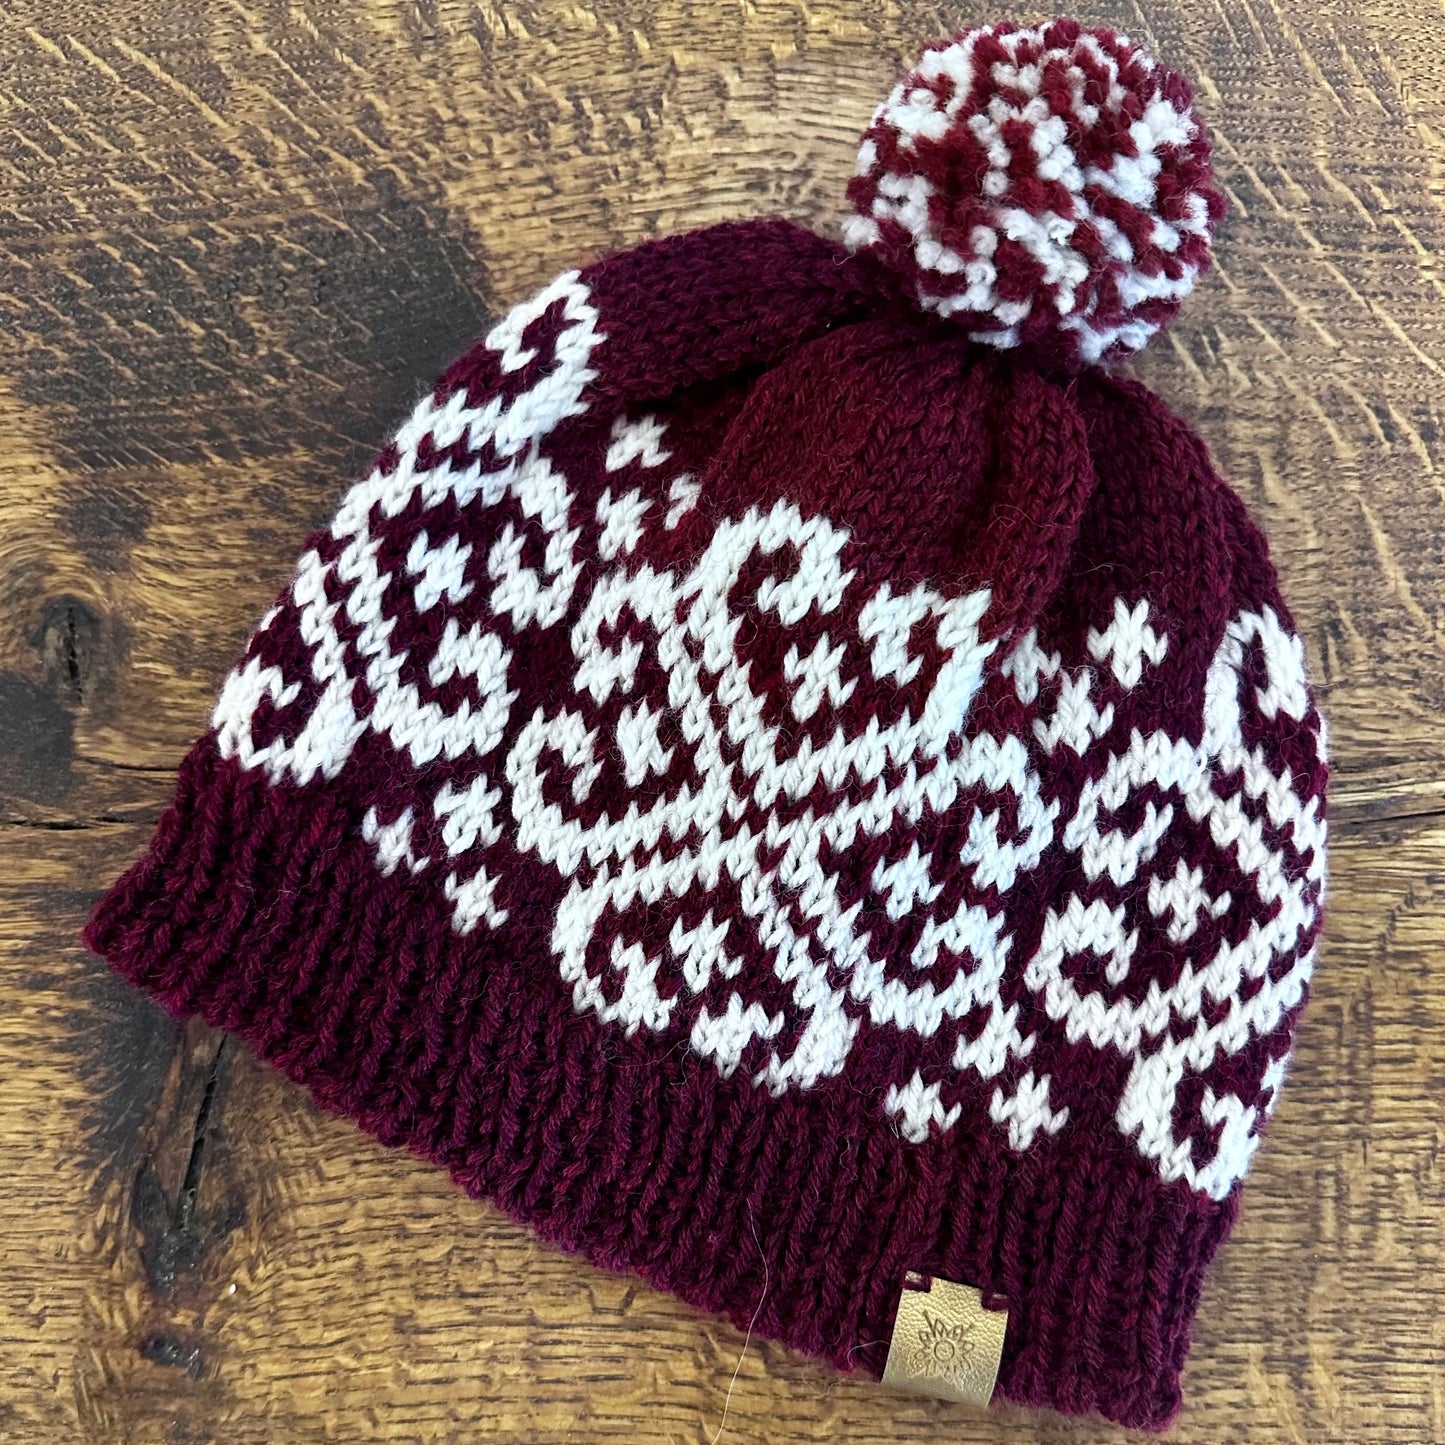 Hand-knitted Nordic Beanie, Adult